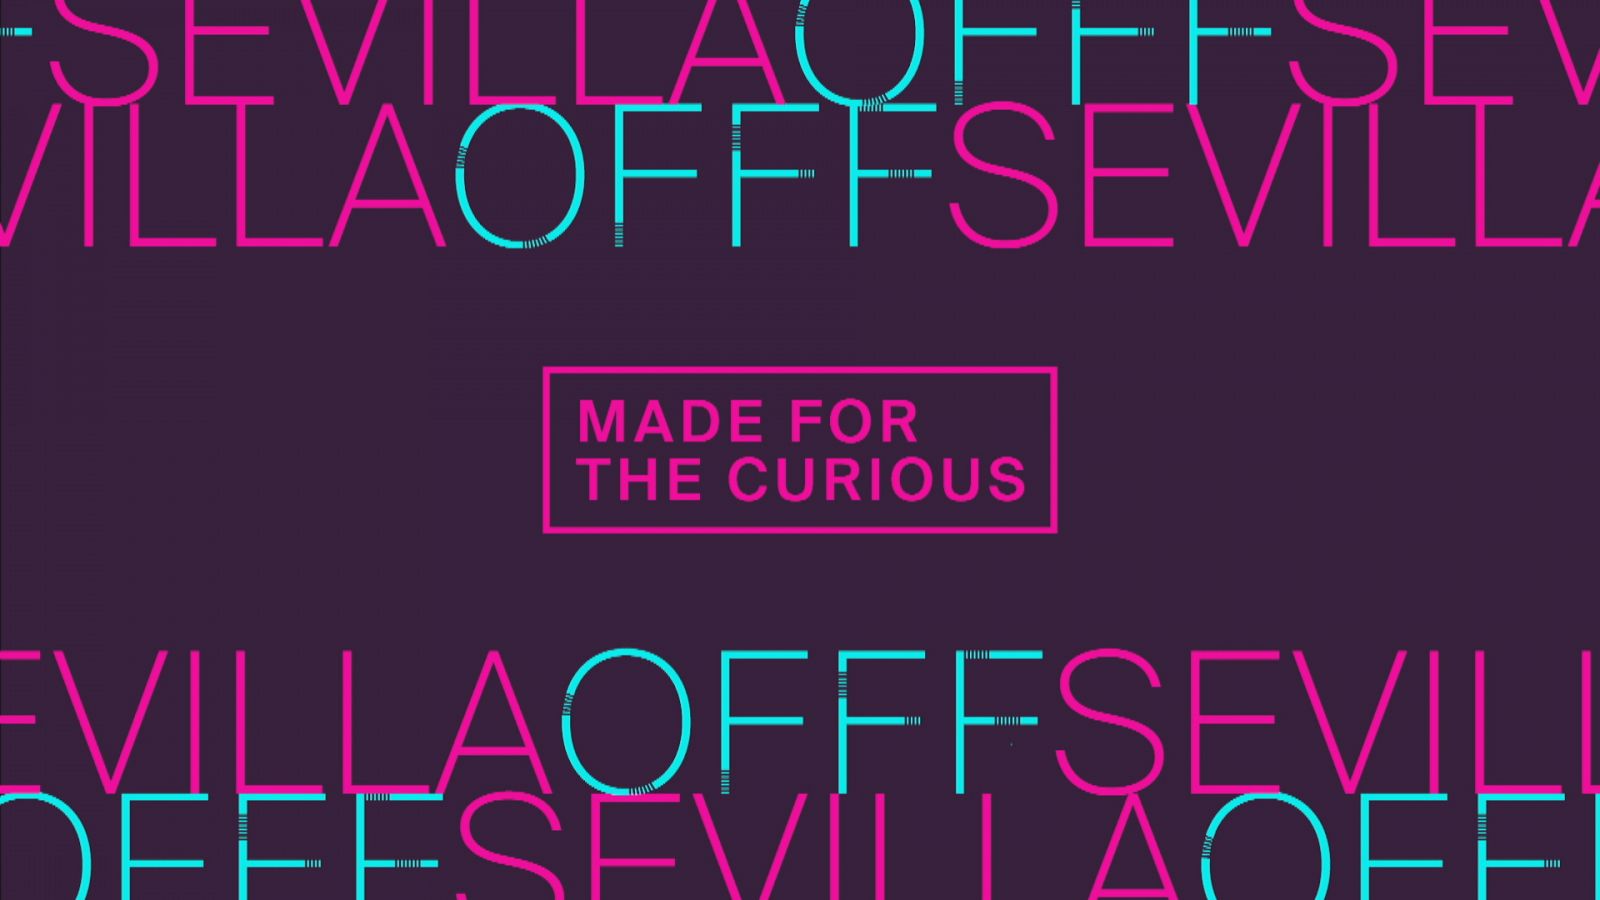 OFFF Sevilla. Made for the curious